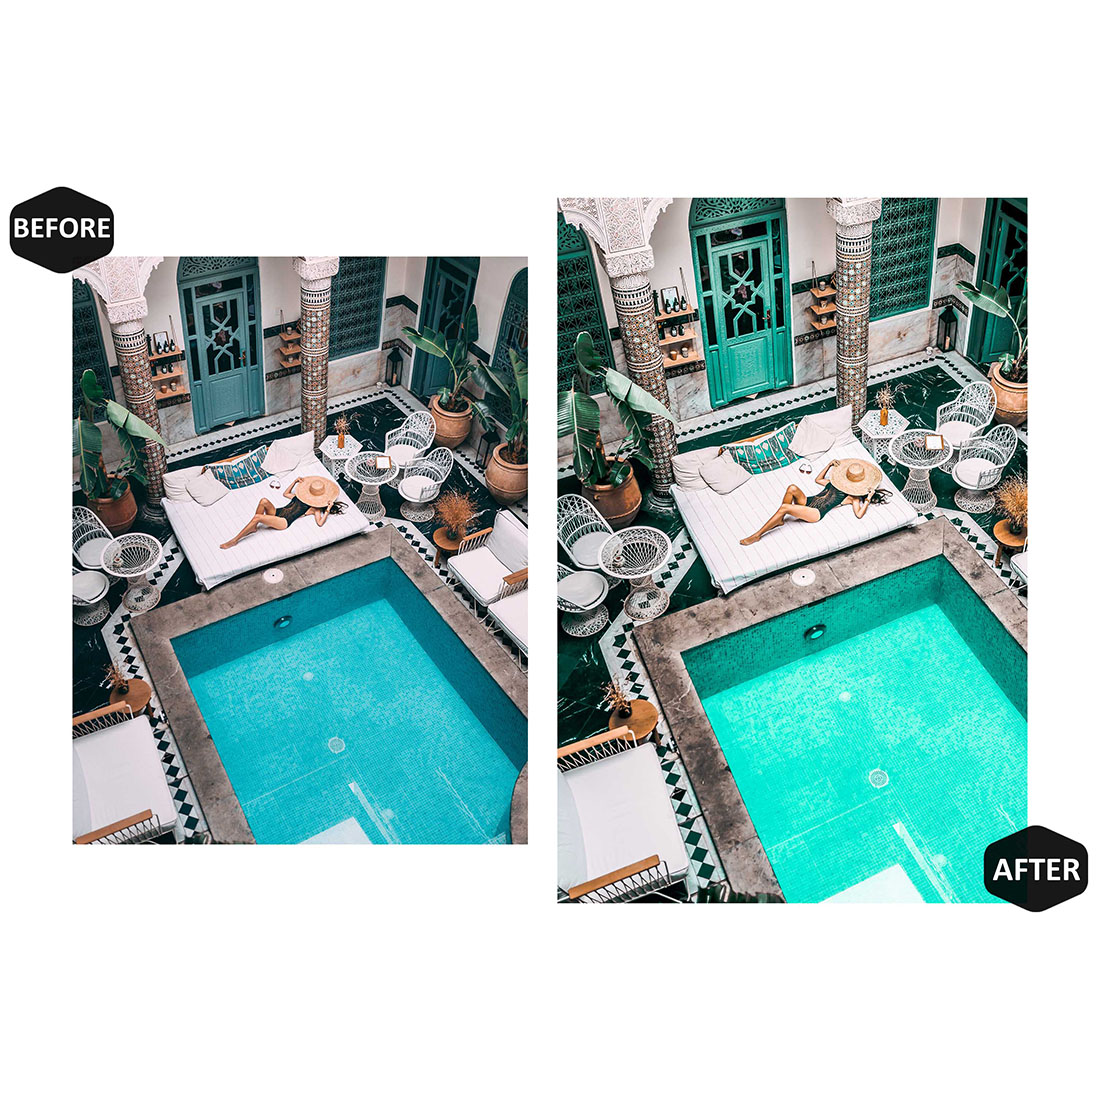 12 Photoshop Actions, Tangerine Ps Action, Bright ACR Preset, Teal Blue Ps Filter, Portrait And Lifestyle Theme For Instagram, Blogger preview image.